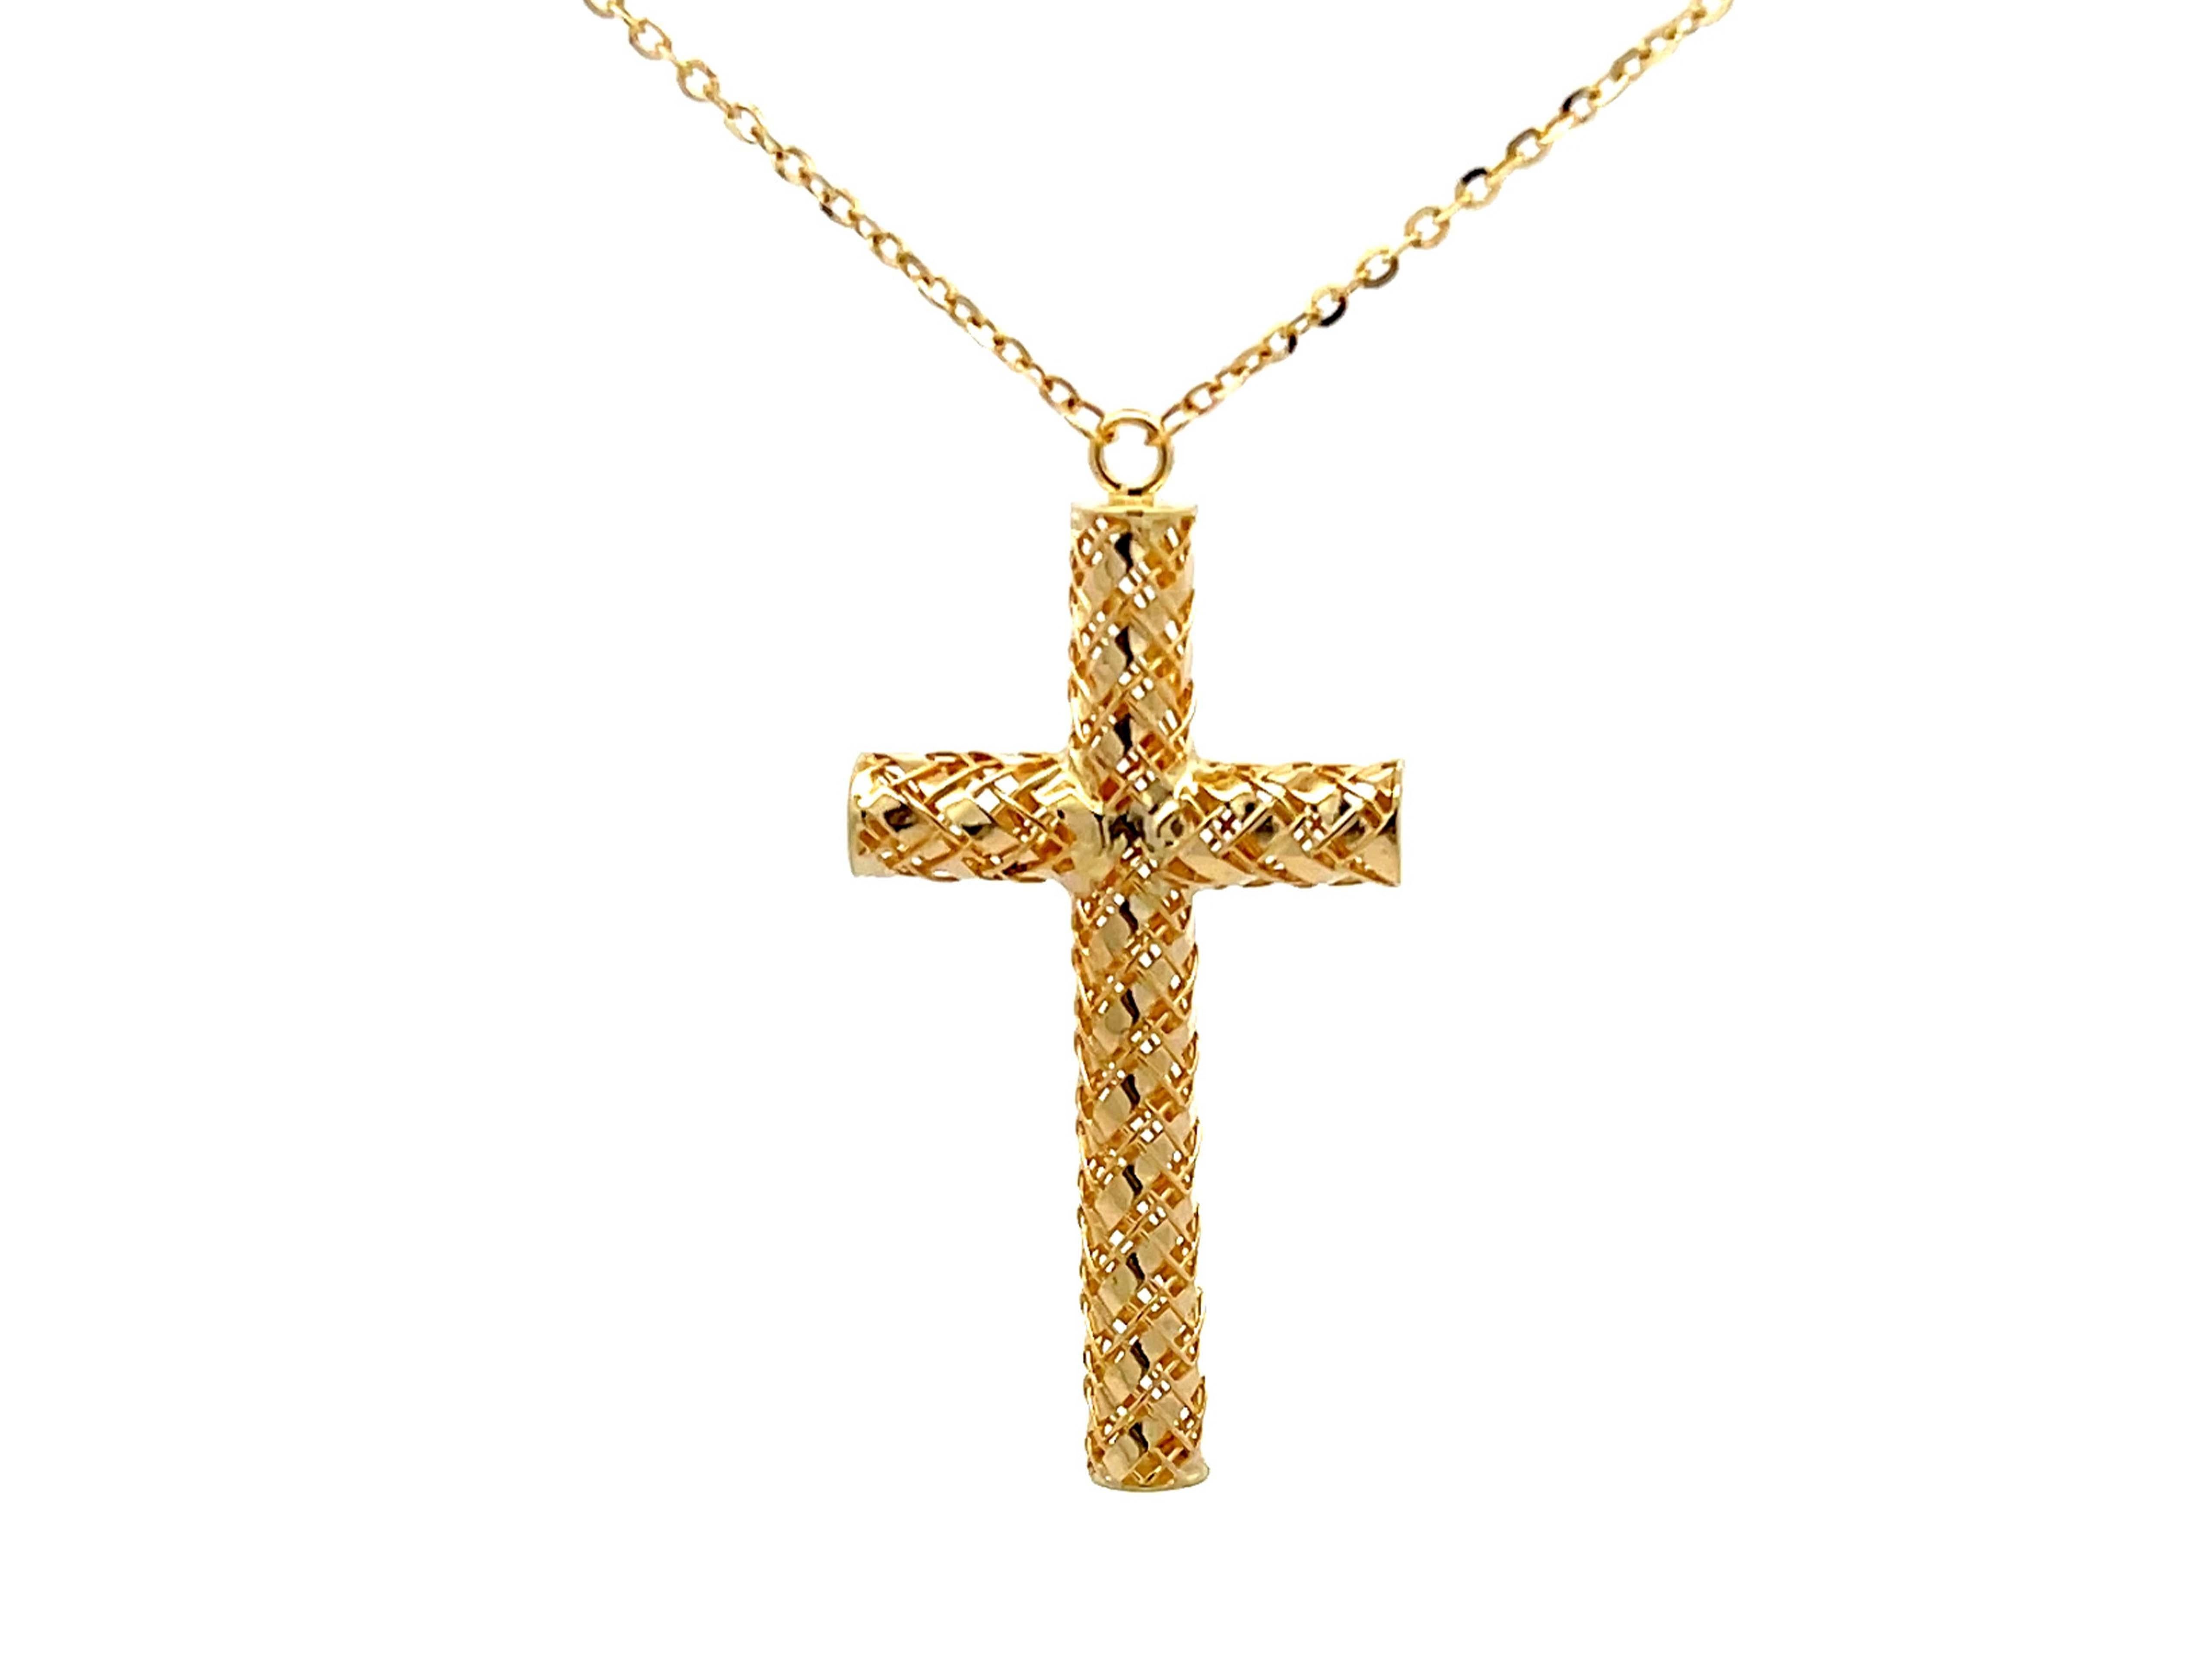 Textured Gold Cross Necklace in 14Karat Yellow Gold For Sale 1